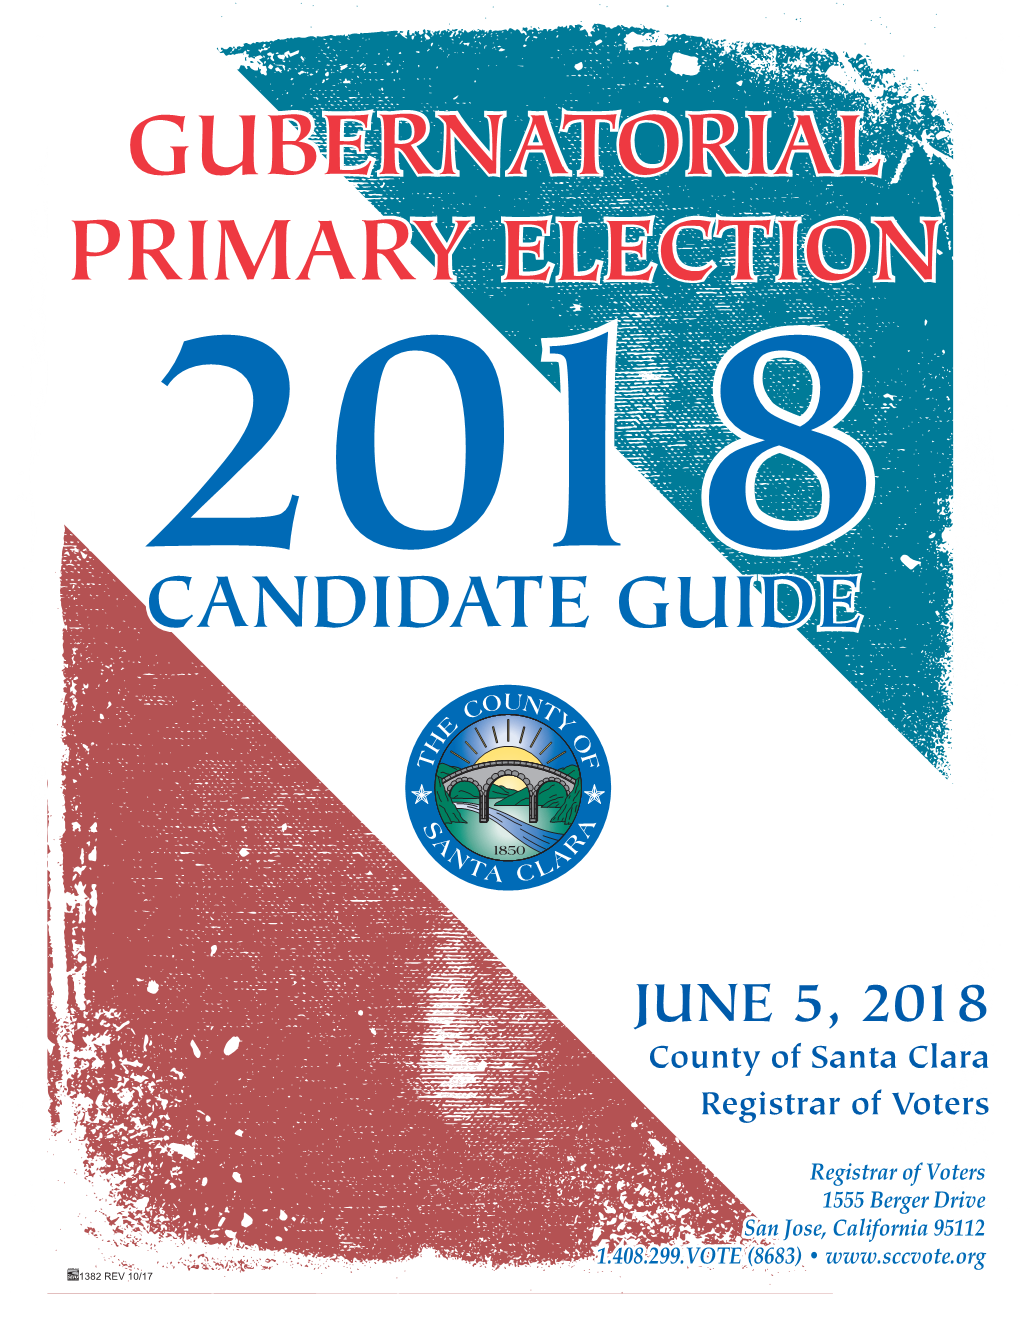 June 5, 2018 Candidate Guide